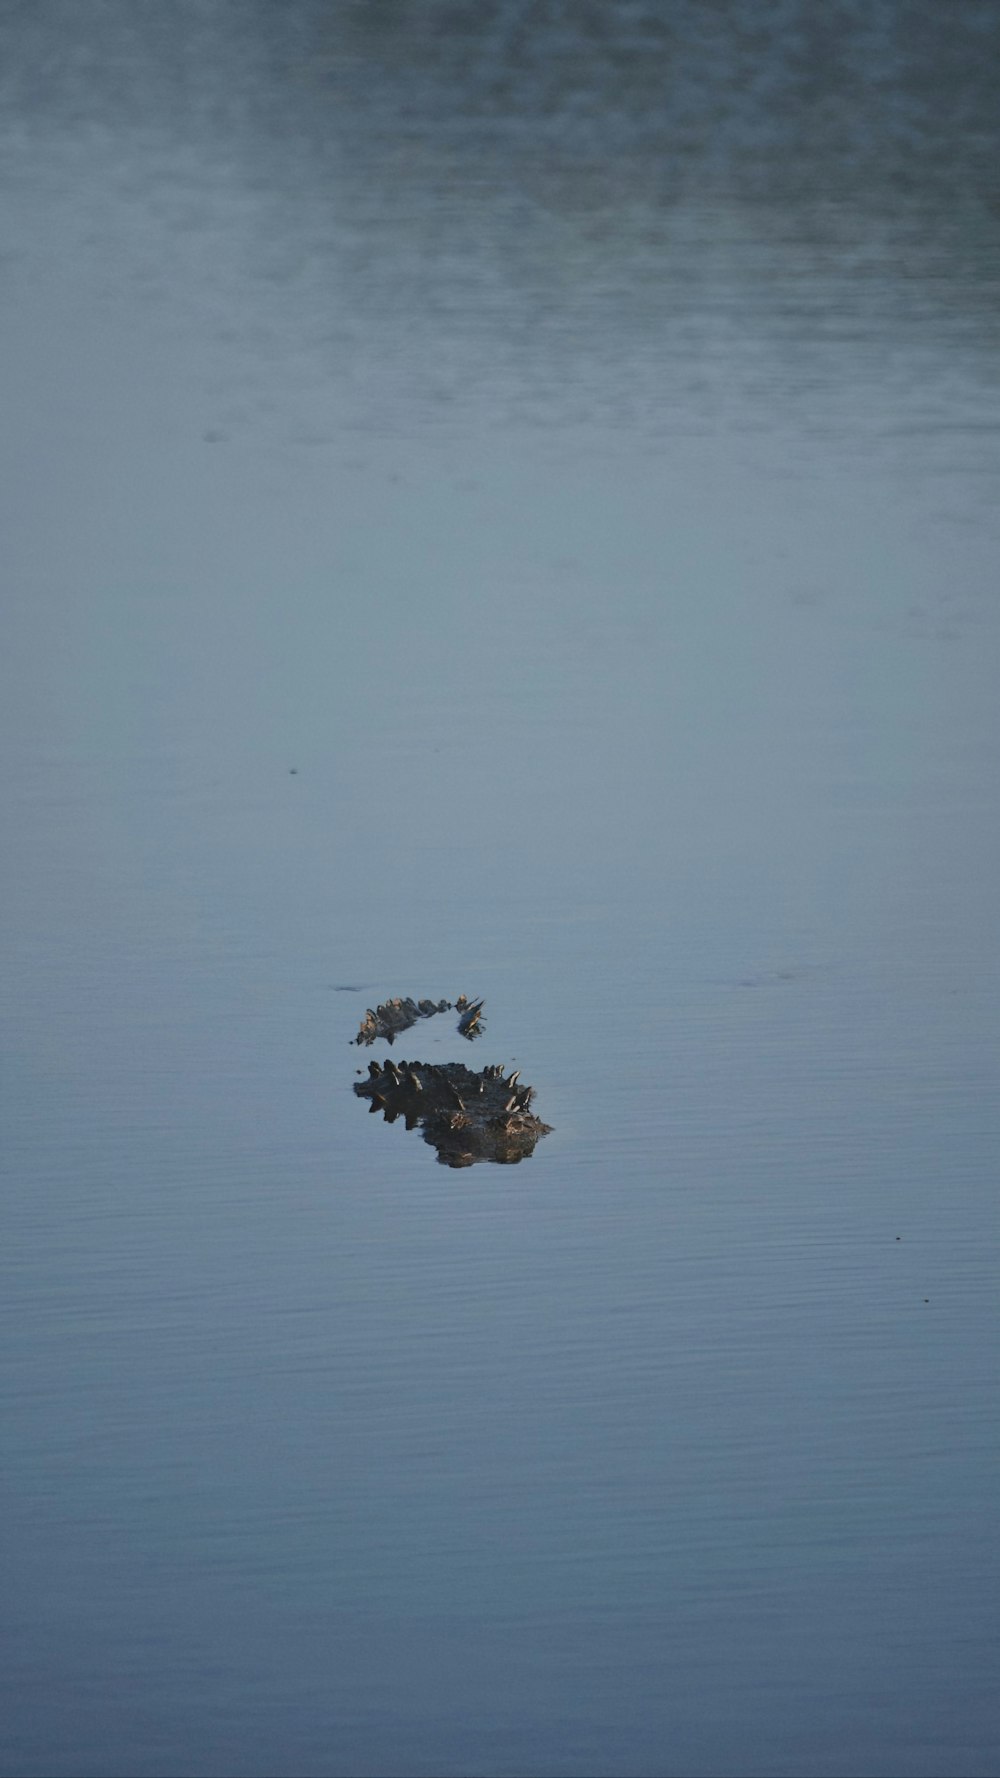 a small bird standing on top of a body of water